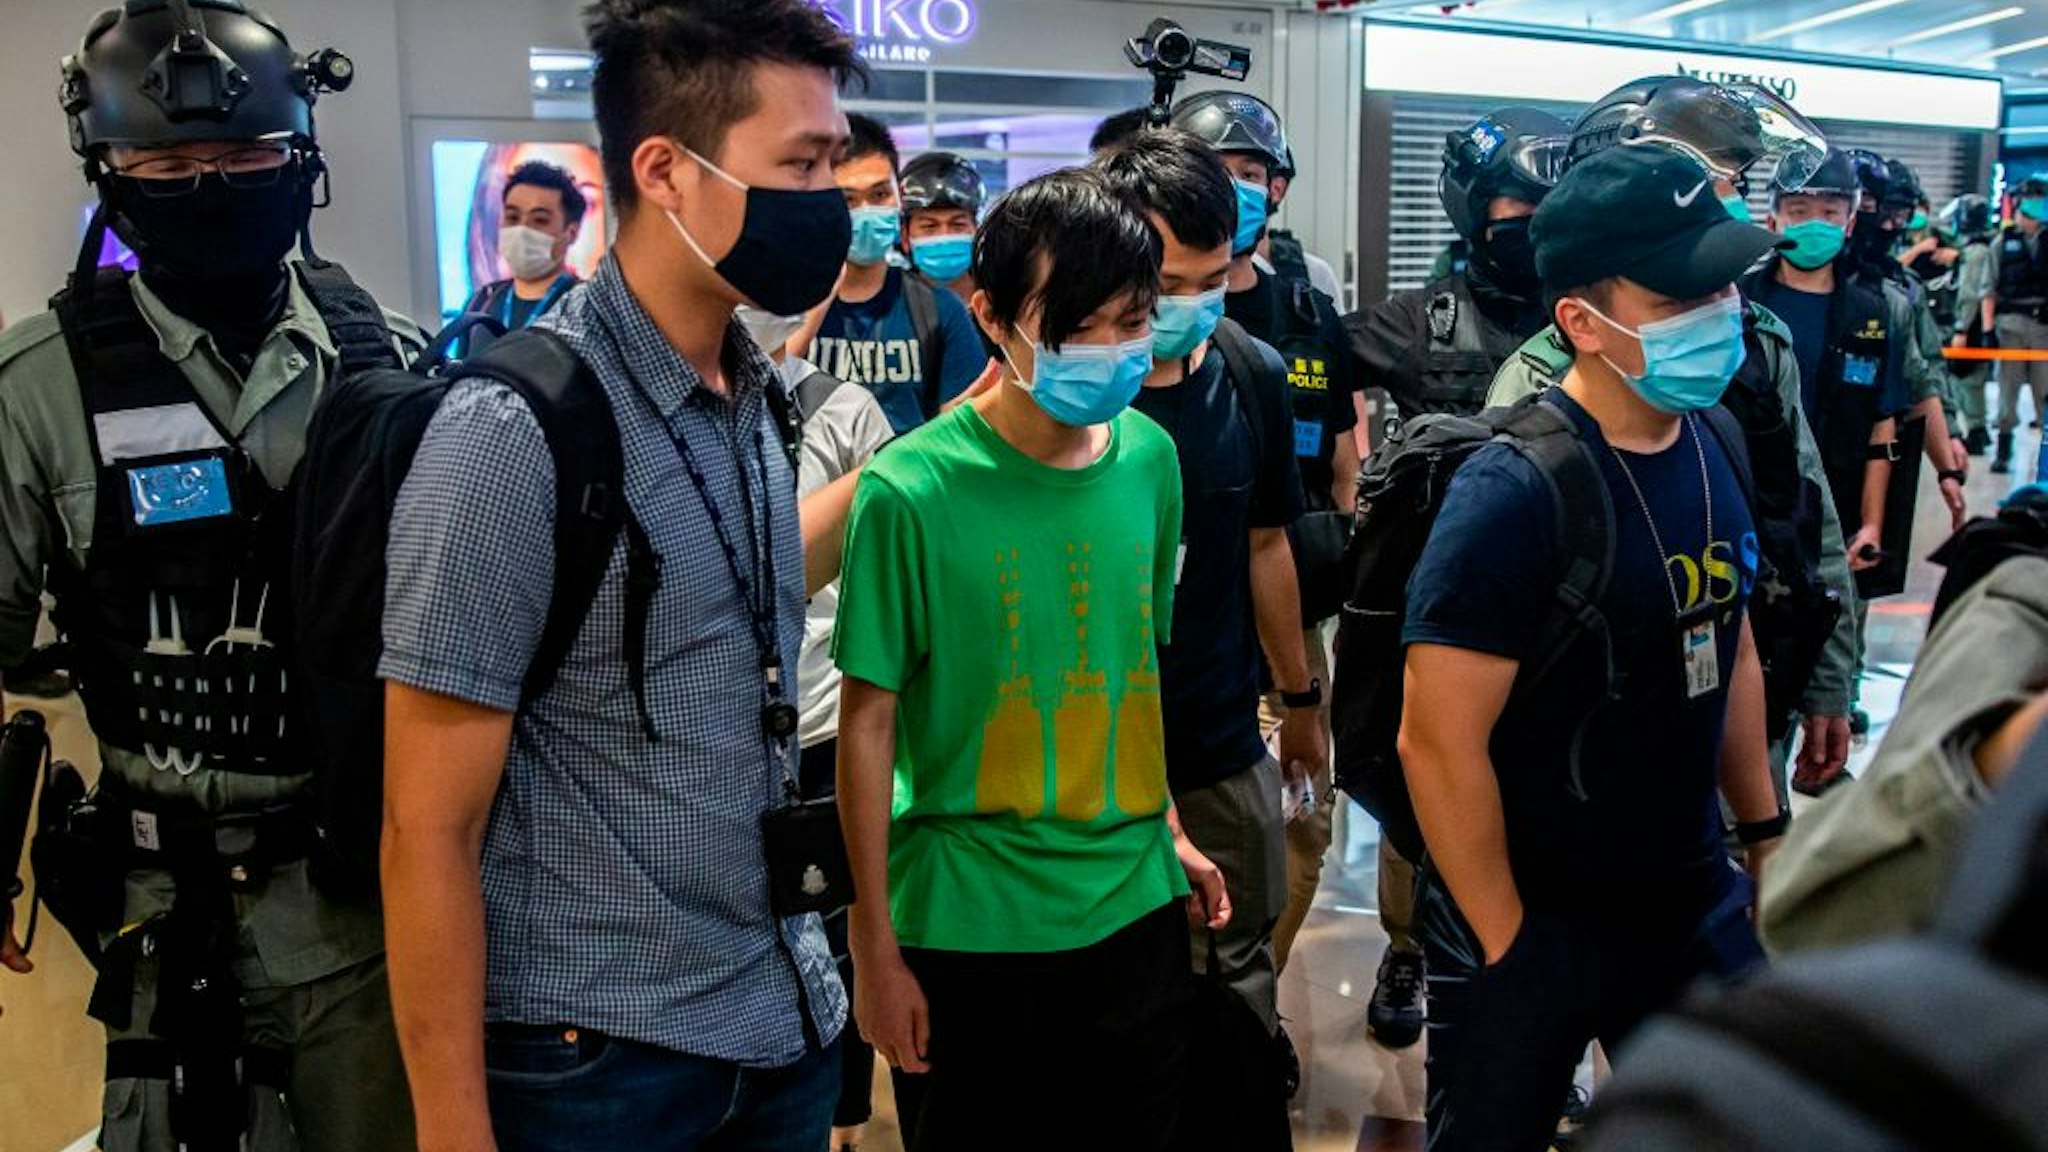 Police take away a man (C) during a demonstration in a mall in Hong Kong on July 6, 2020, in response to a new national security law introduced in the city which makes political views, slogans and signs advocating Hong Kongs independence or liberation illegal. - Hong Kongers are finding creative ways to voice dissent after Beijing blanketed the city in a new security law and police began making arrests for people displaying now forbidden political slogans. (Photo by ISAAC LAWRENCE / AFP) (Photo by ISAAC LAWRENCE/AFP via Getty Images)